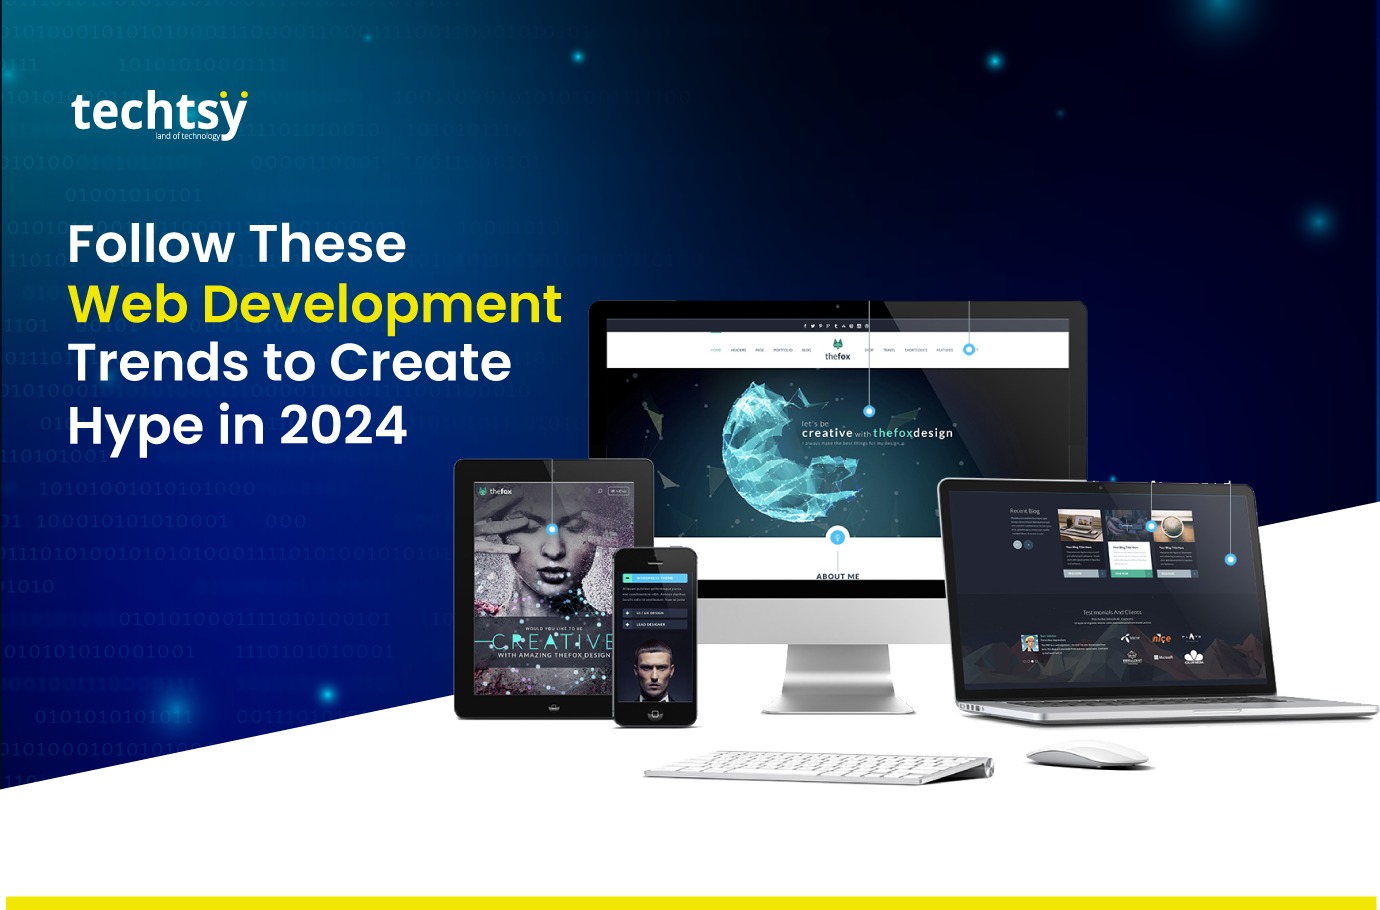 Top 7 Web Development Trends to Create Hype in 2024